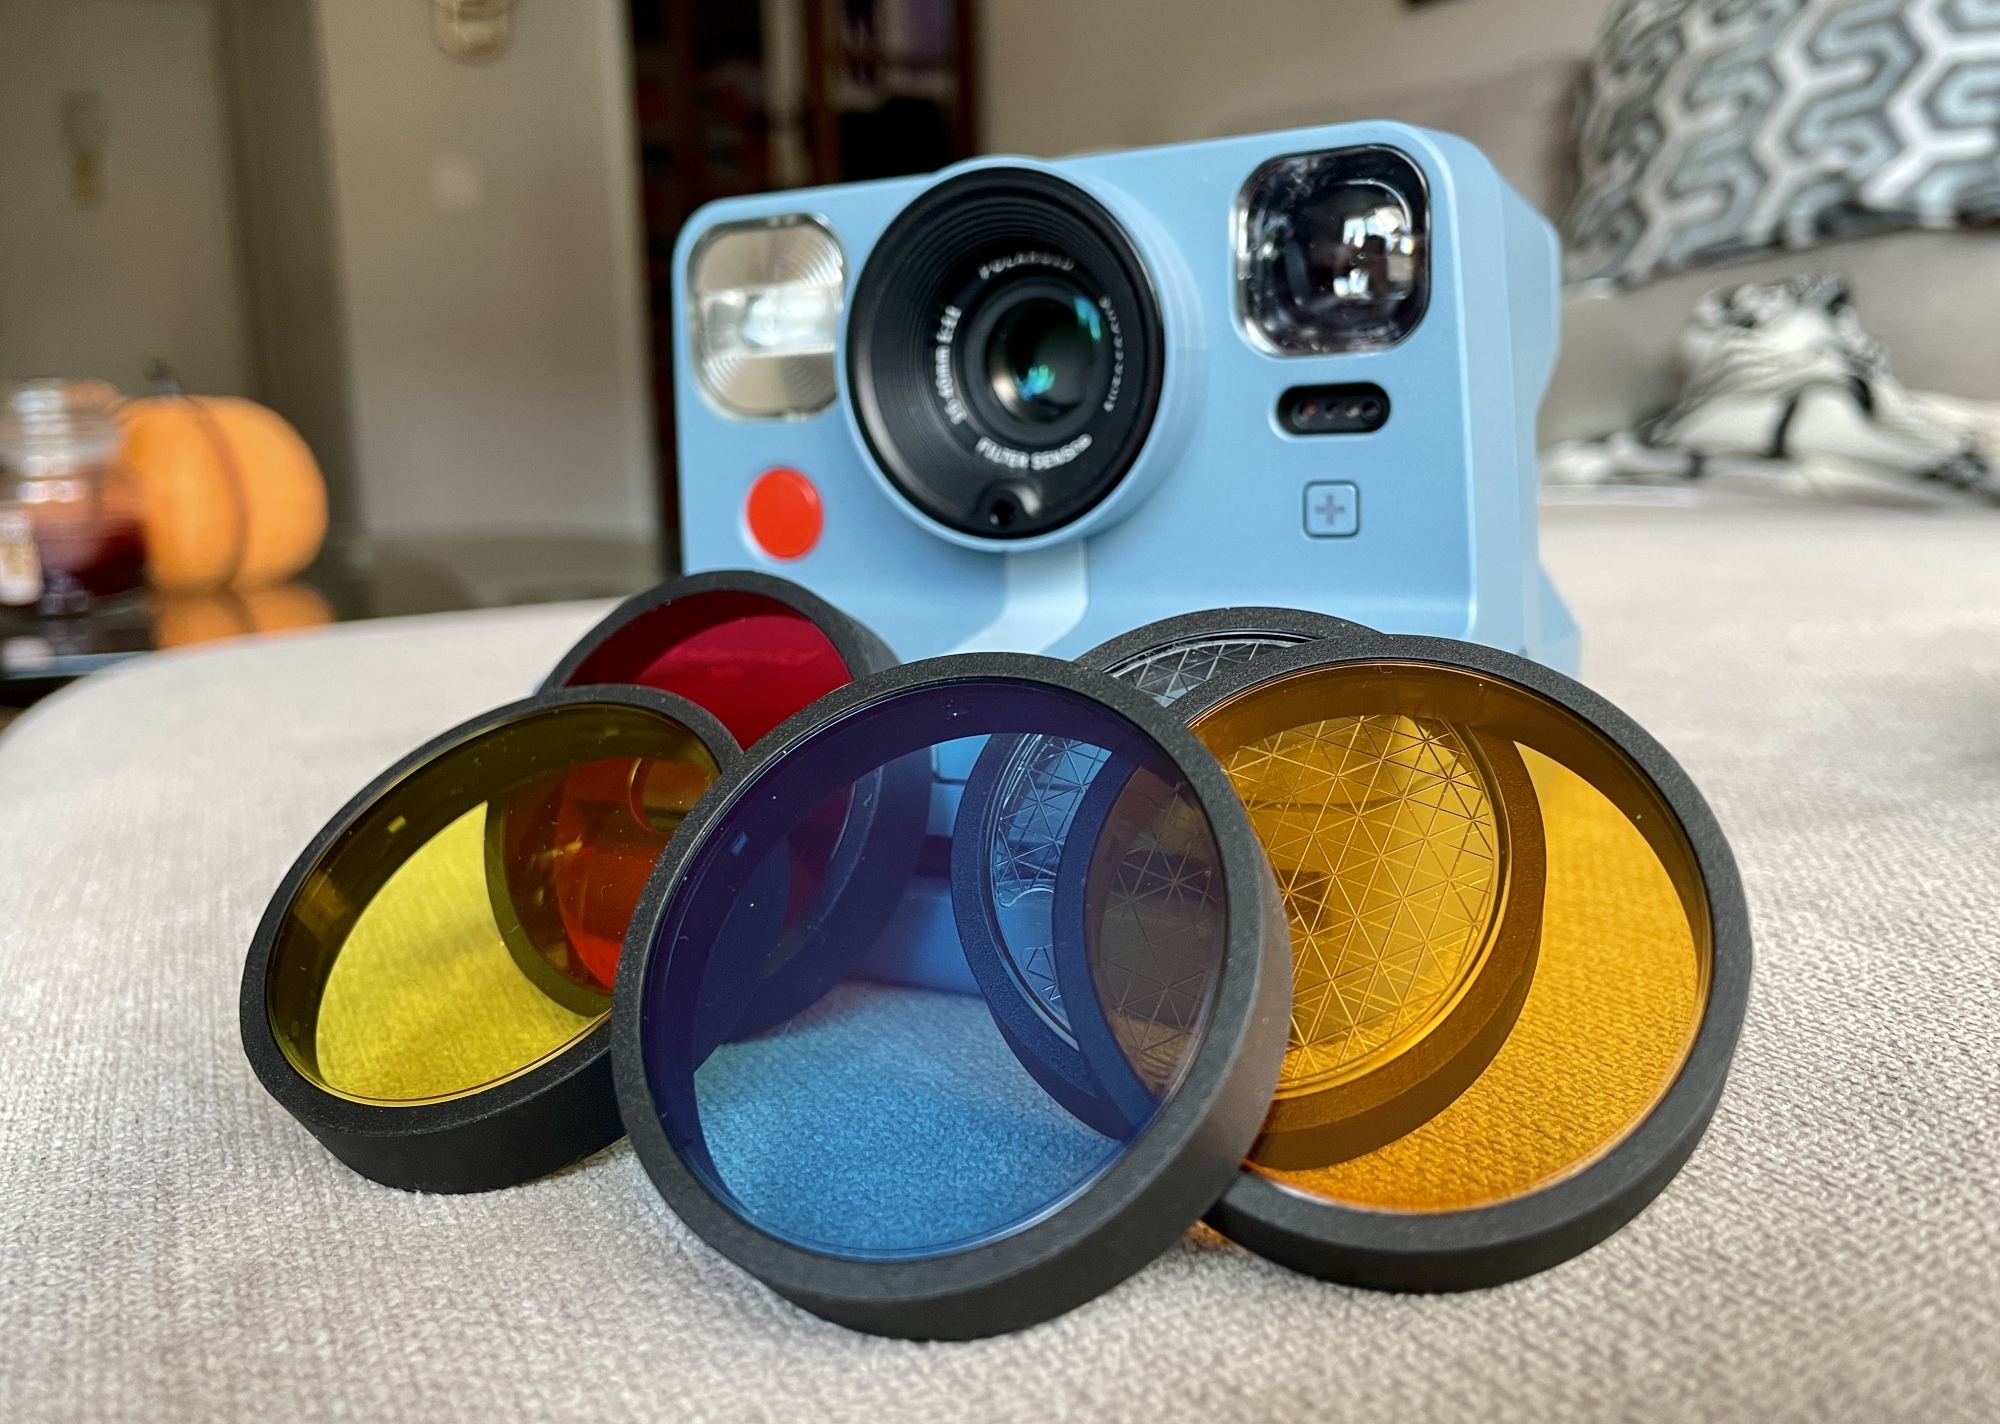 The included lens filters are really easy to attach.